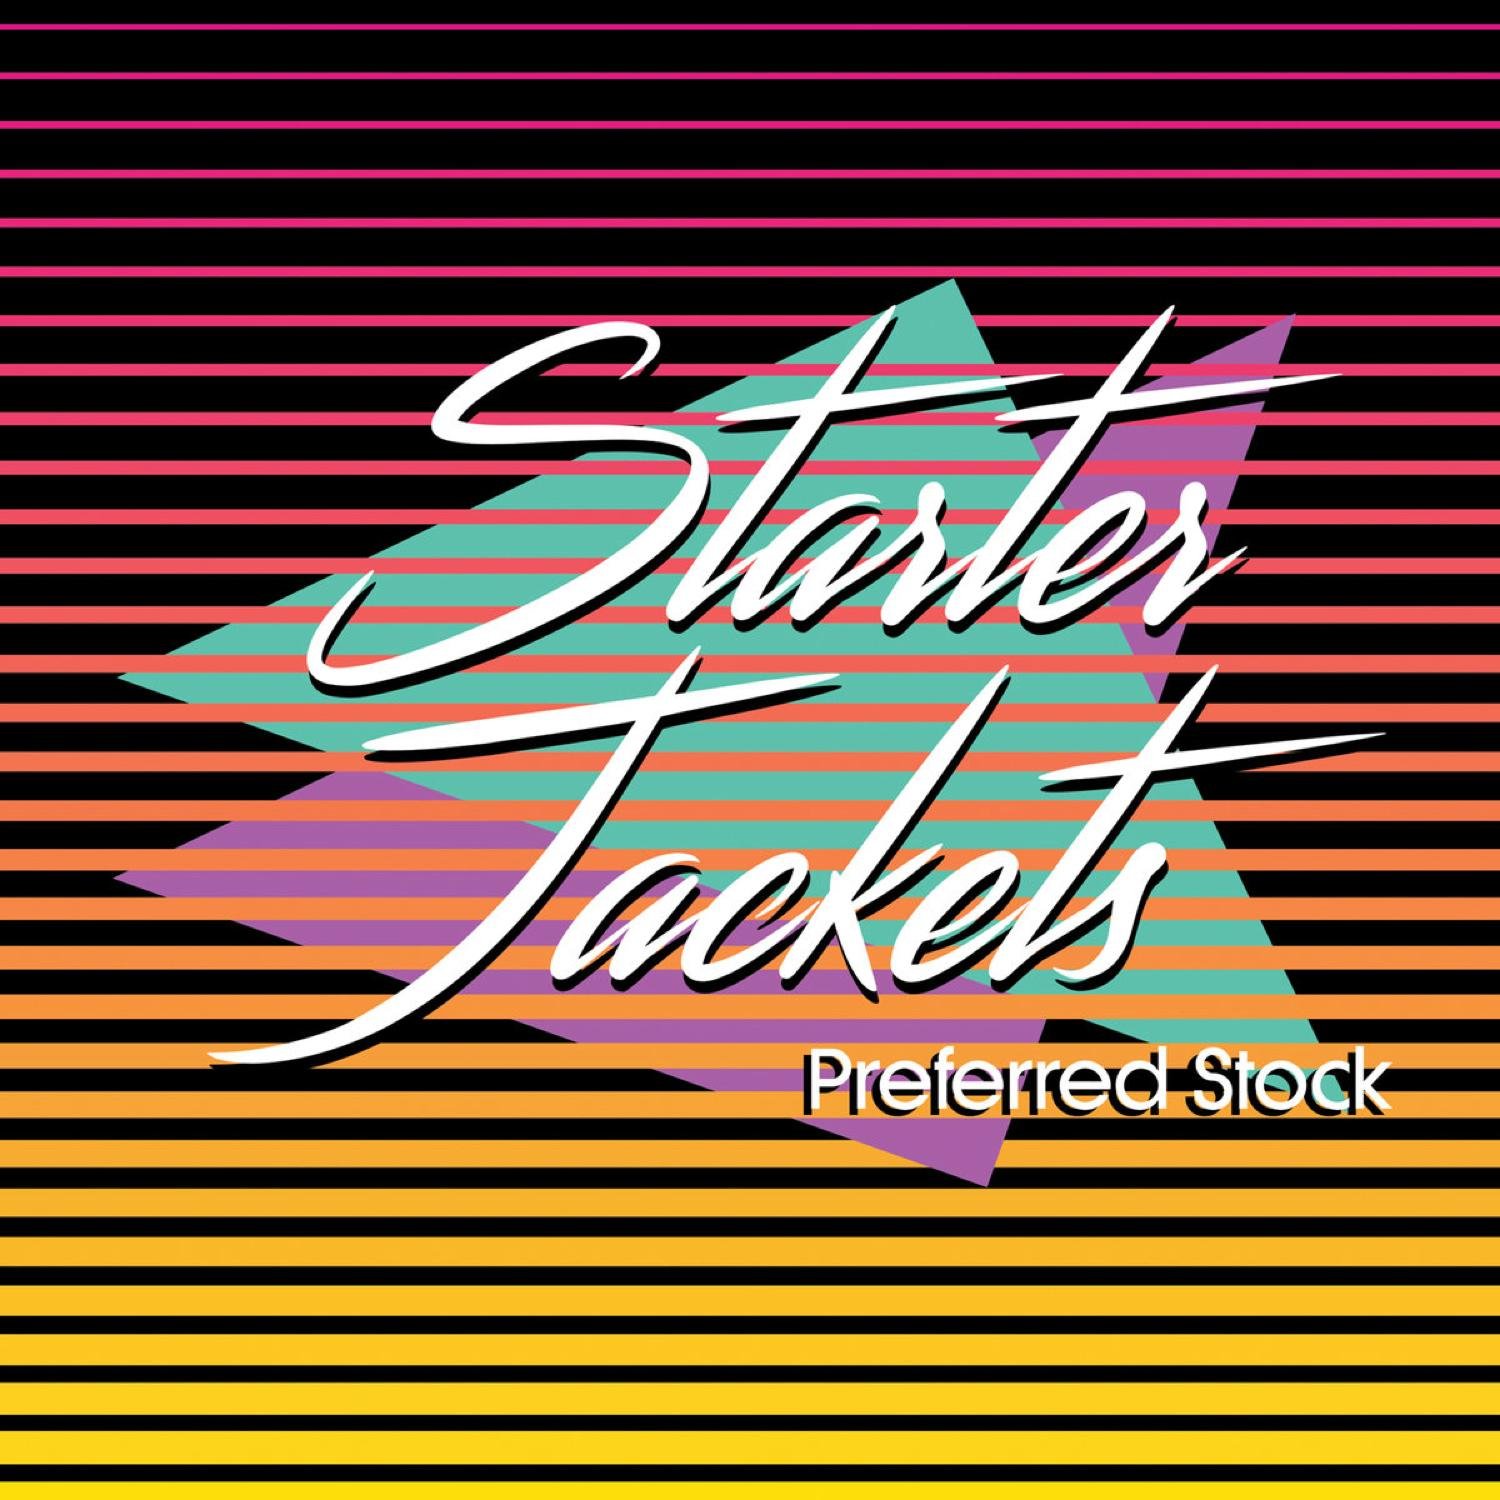 Starter Jackets - Preferred Stock (2017) FLAC Download